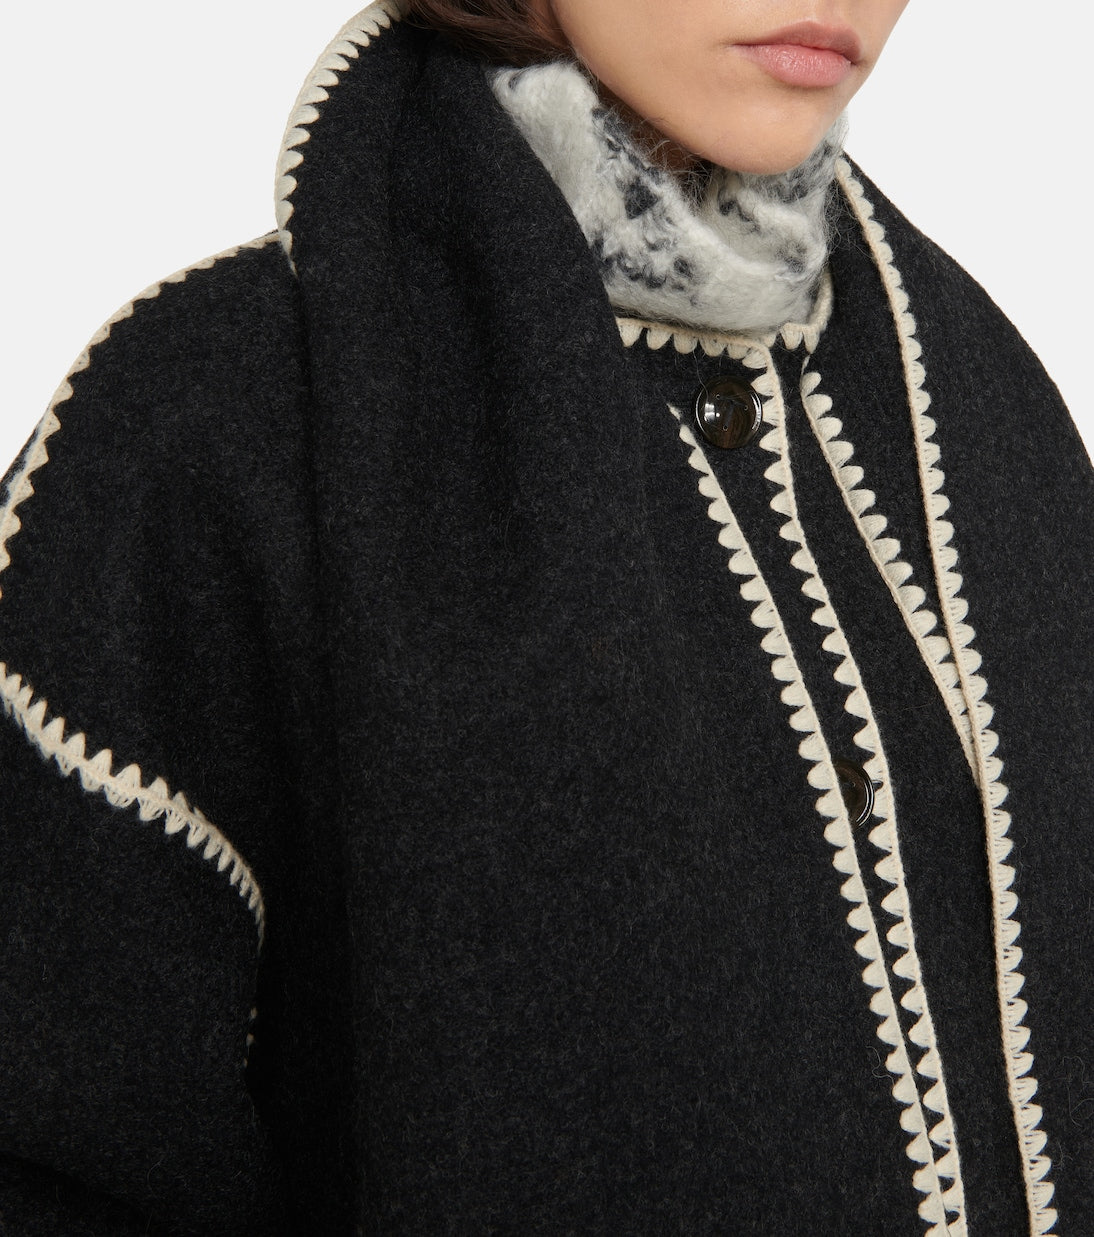 "The epitome of luxury and artistry, the Totême Veste Evelyn jacket exudes sophistication. Expertly crafted with a fringed scarf integrated into the design, this oversized wool blend jacket features dropped shoulders, wide sleeves, and contrast crochet detailing for a truly elevated look."